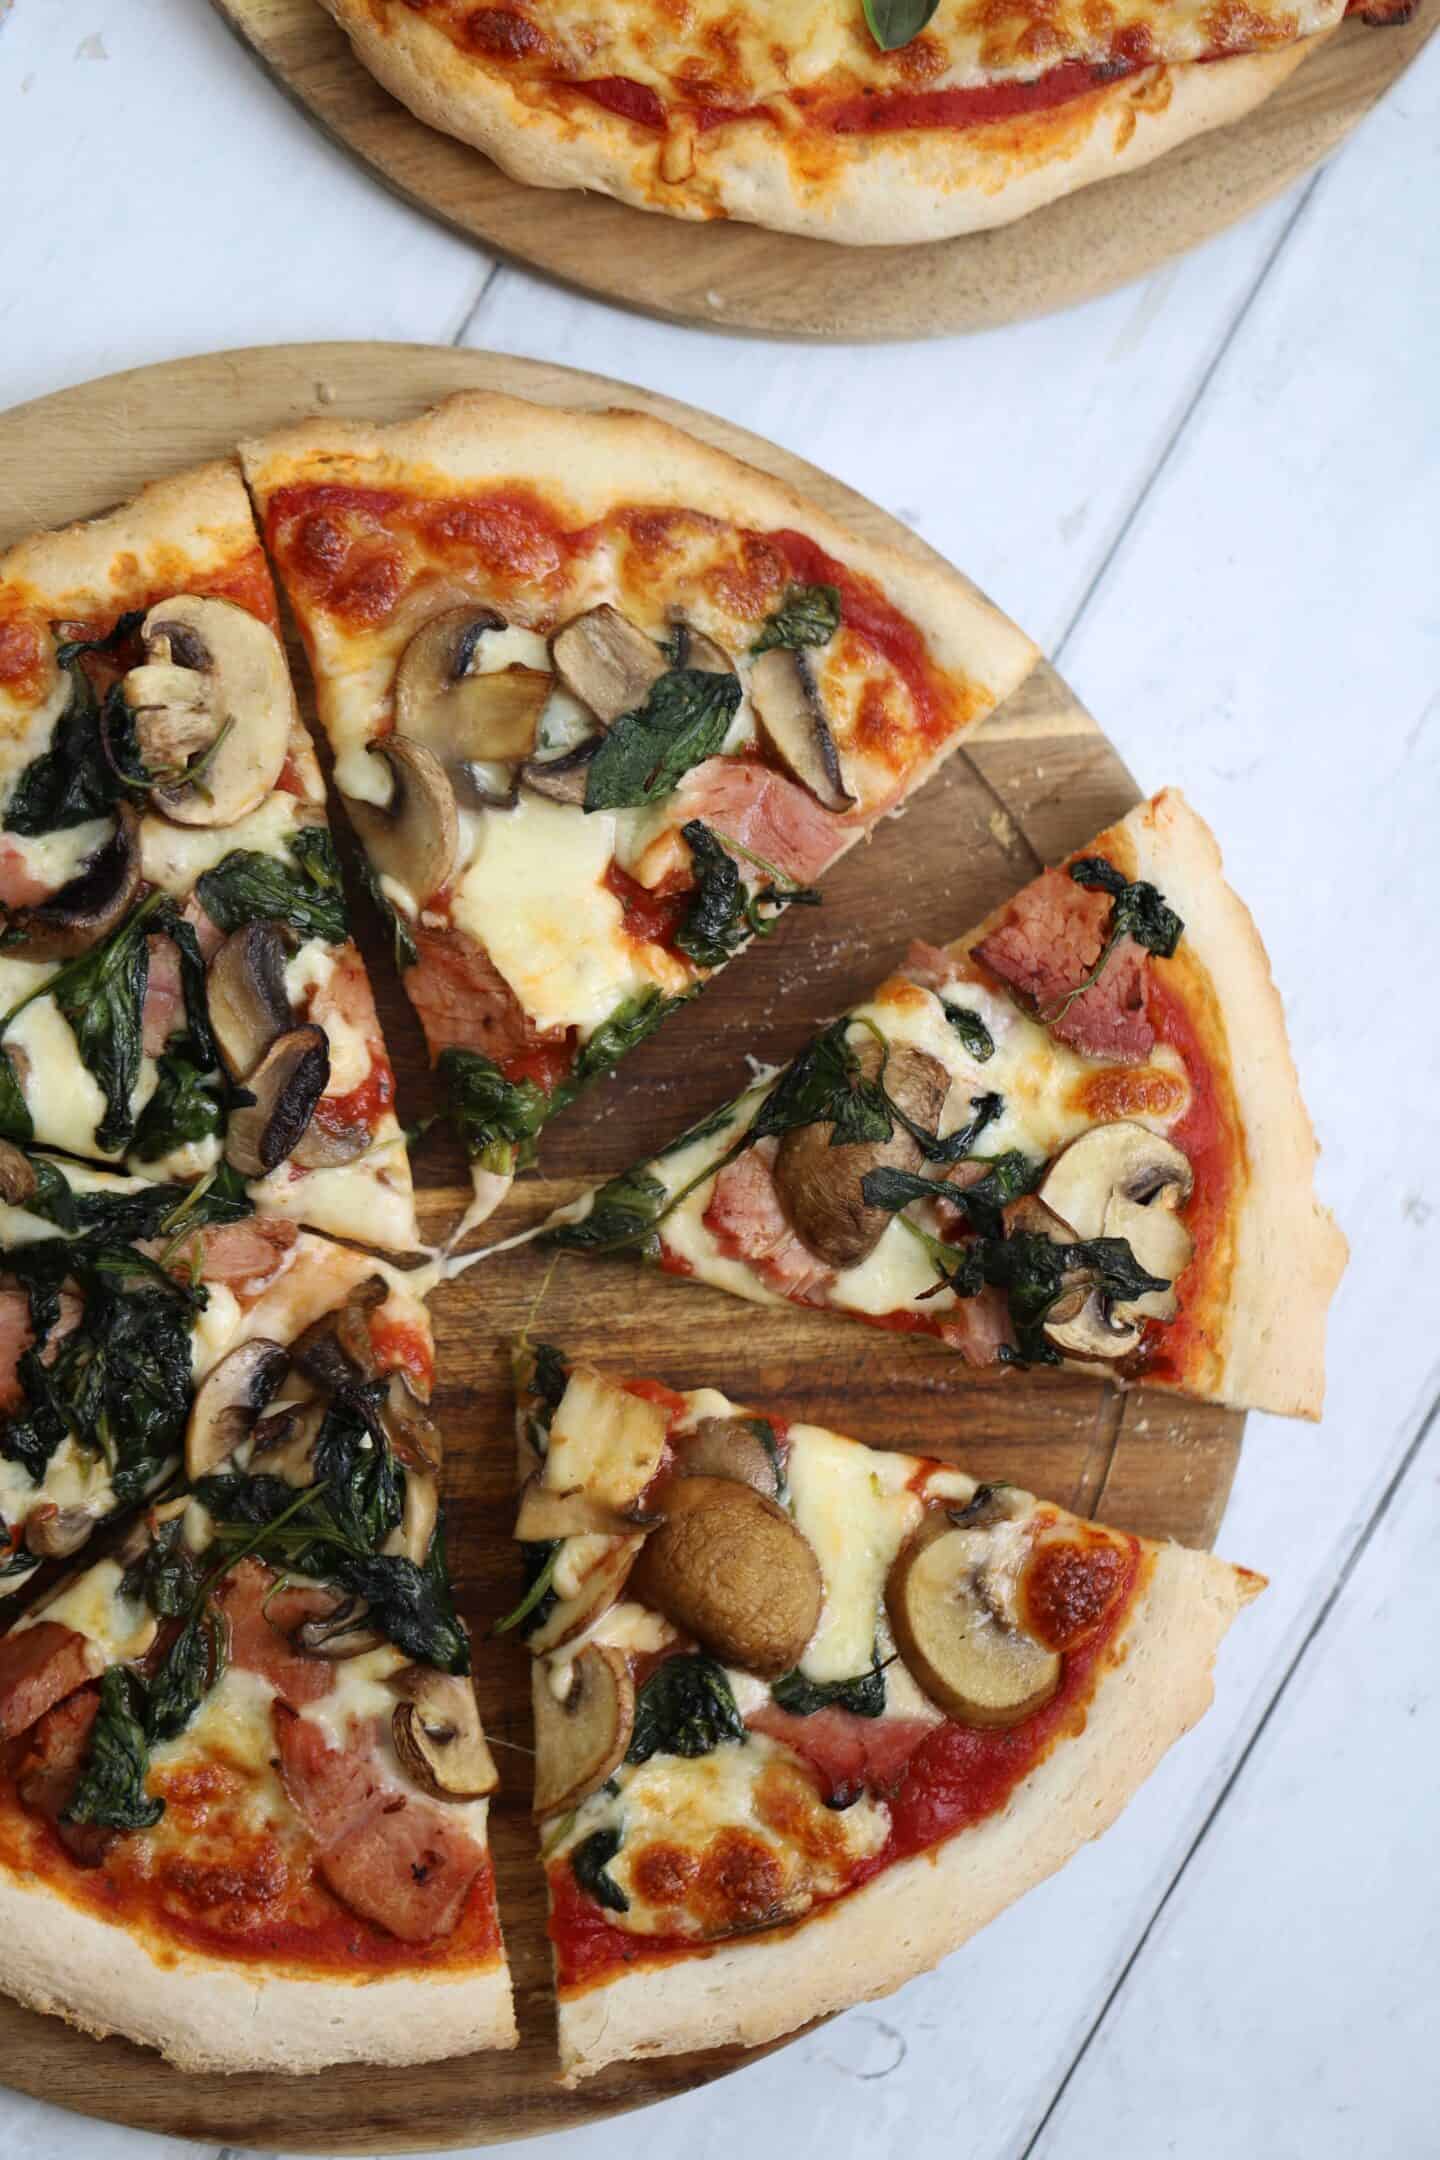 A gluten free pizza with mushroom, ham and spinach.